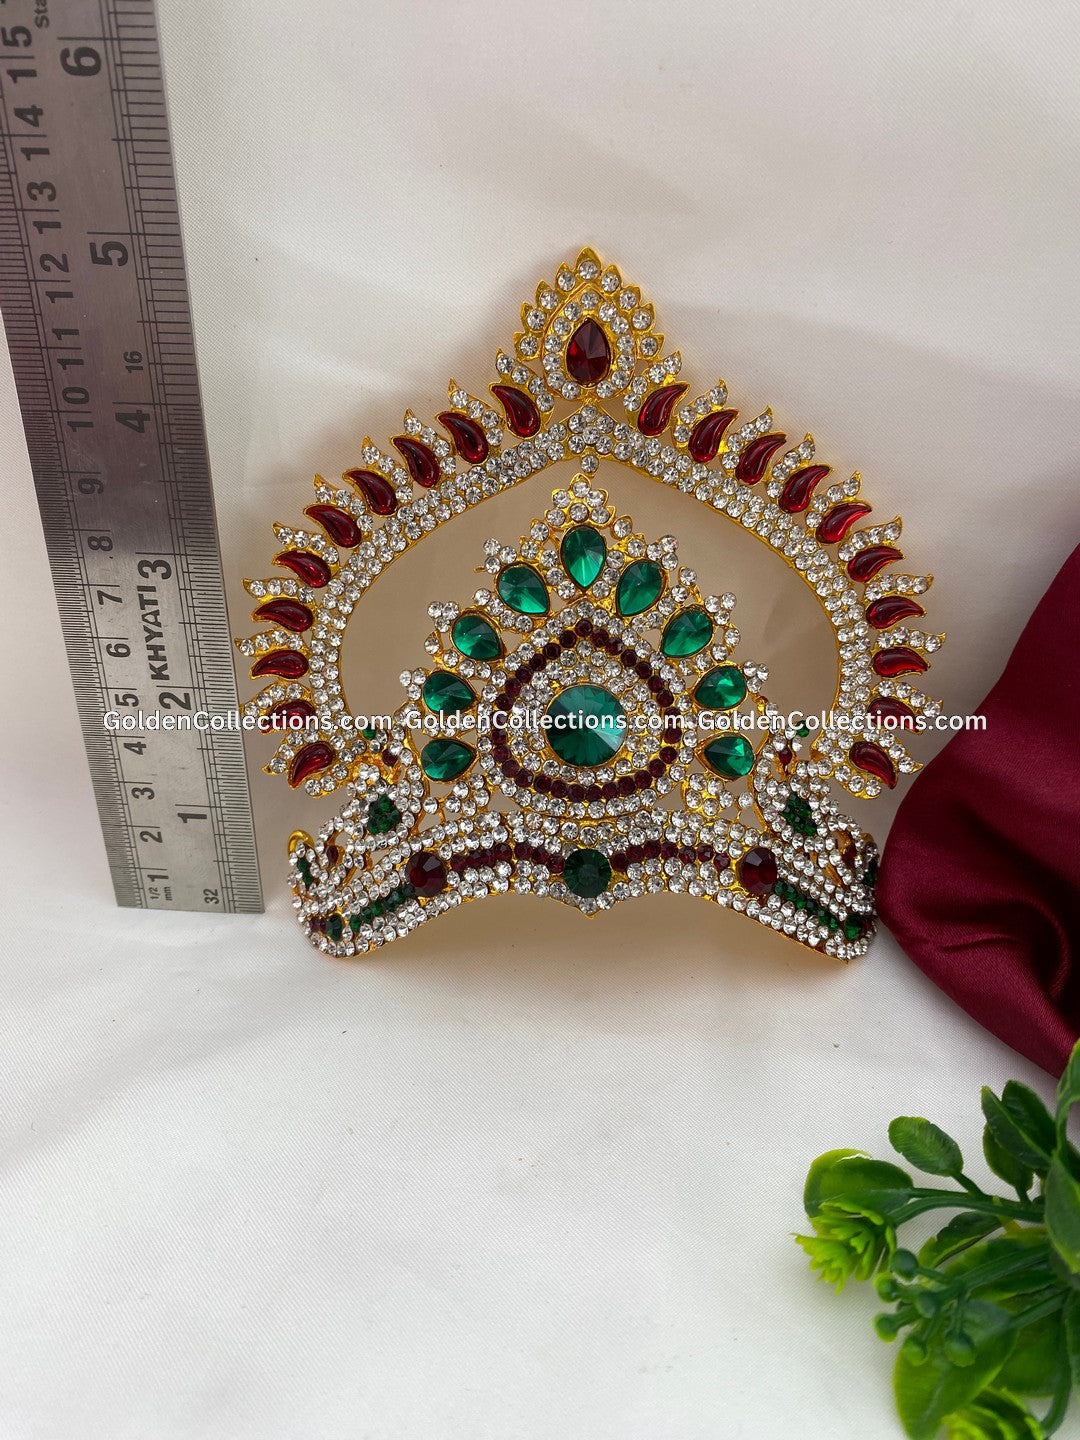 Ornamental Crown for God - GoldenCollections DGC-060 2